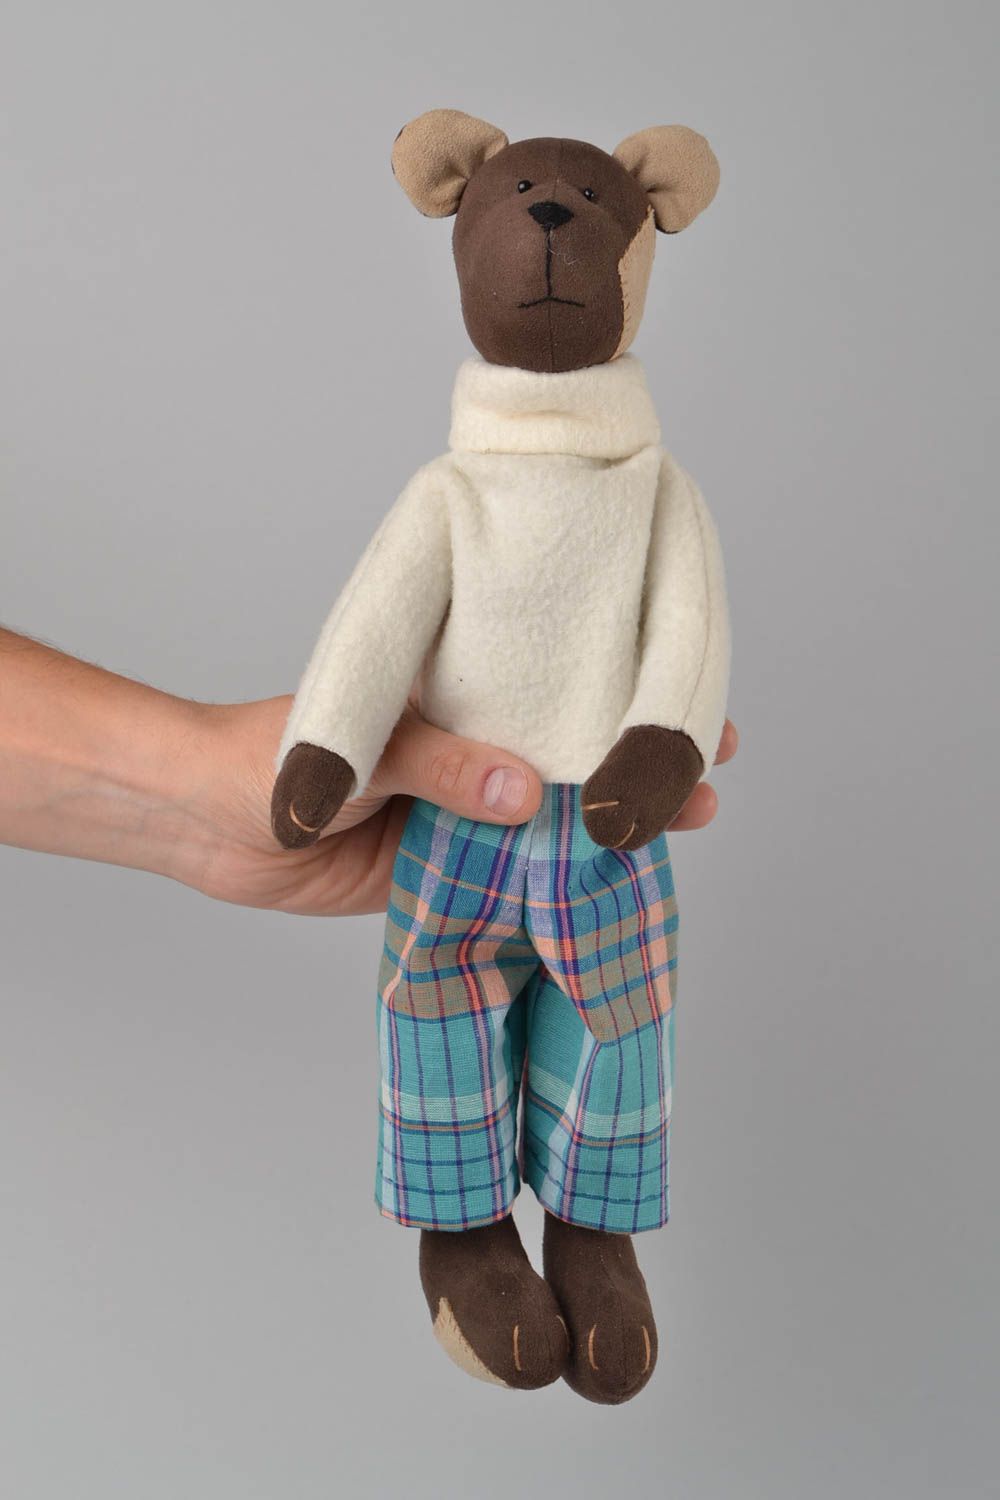 Handmade fabric soft toy brown bear in white sweater and checkered shorts photo 2